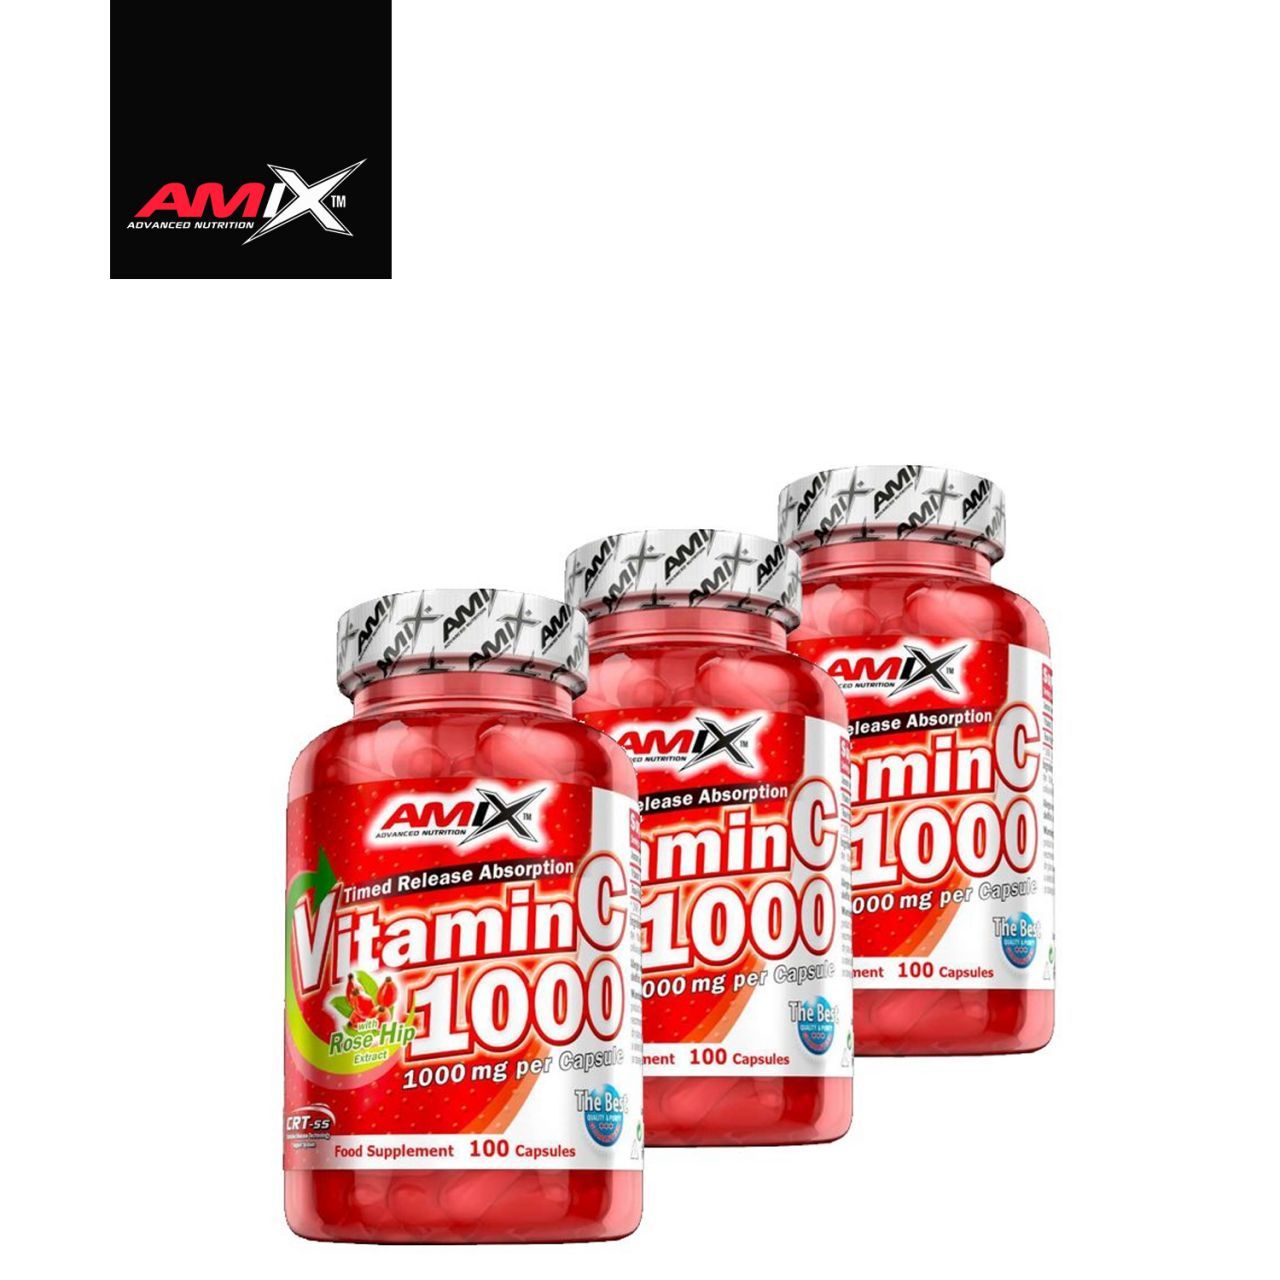 Amix - Vitamin C 1000 With Rose Hip Exract - Timed Release Absorbtion - 3 x 100 kapszula